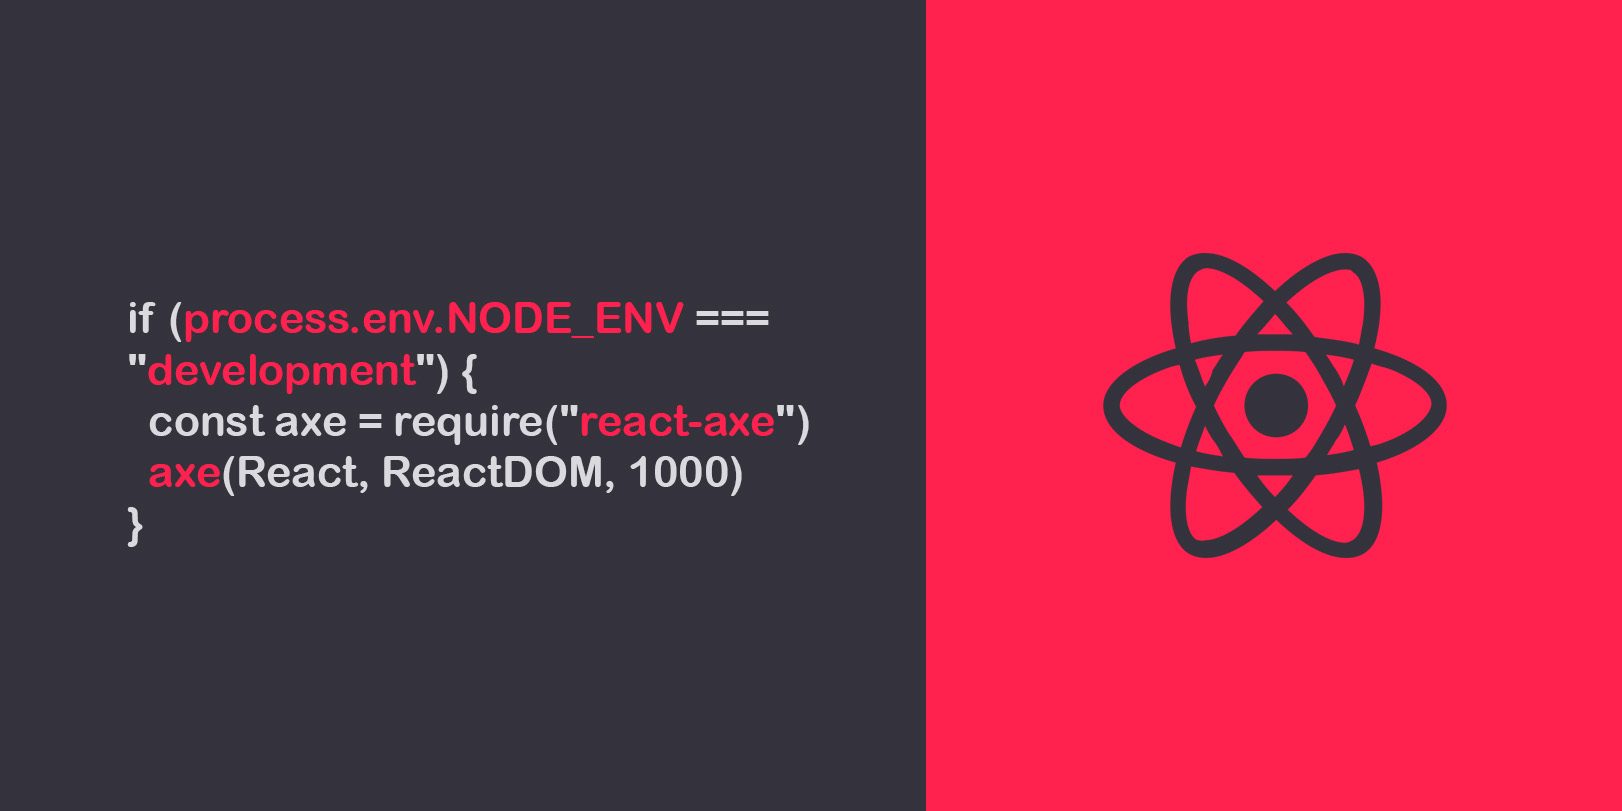 A fast React boilerplate and toolkit focusing on cutting edge technologies and tools.